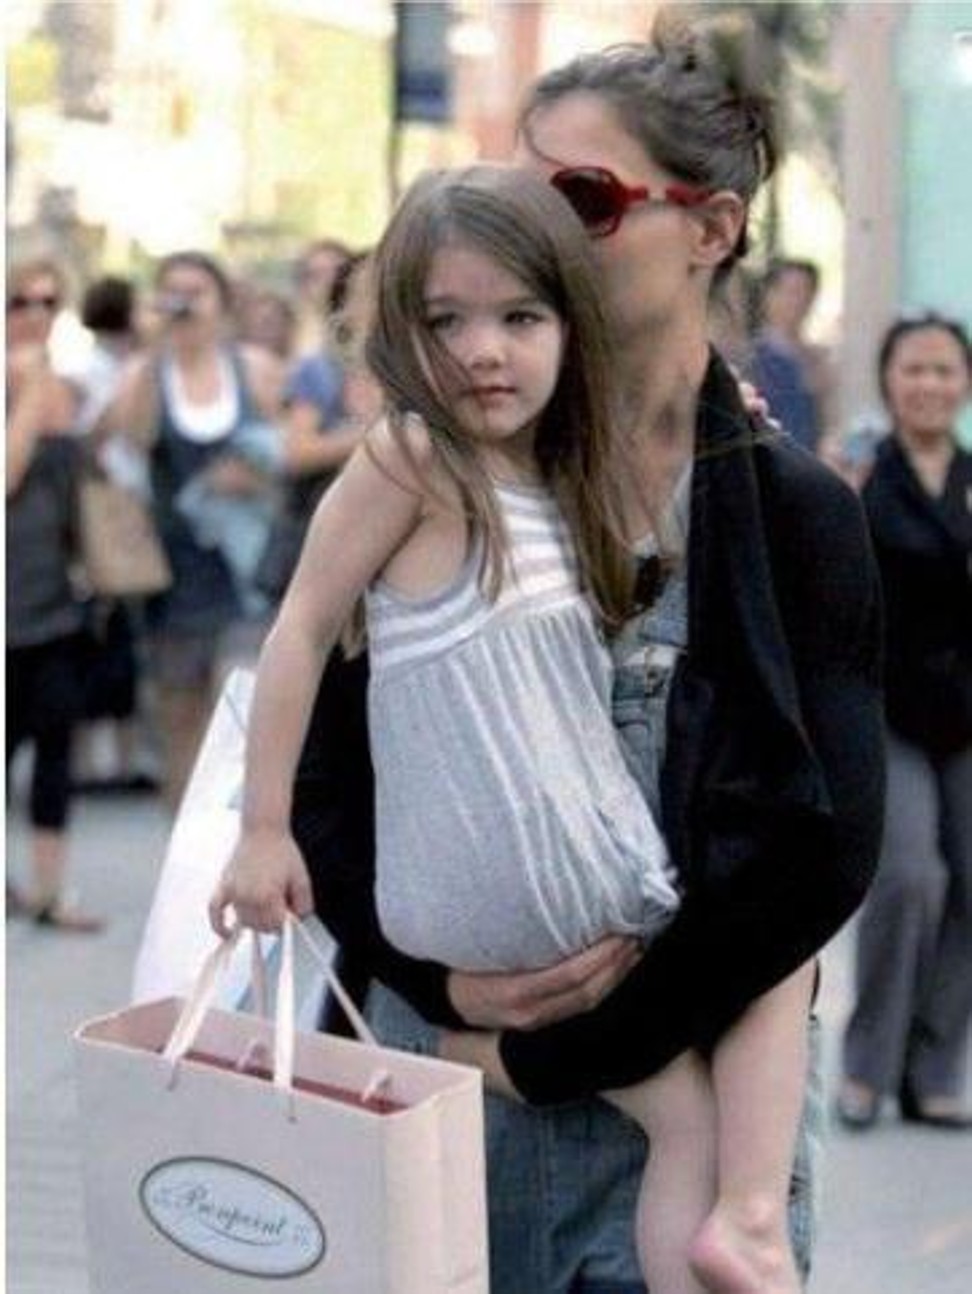 Suri Cruise – the daughter of actor Tom Cruise and actress Katie Holmes – with a Bonpoint bag. Photo: Ifeng Fashion